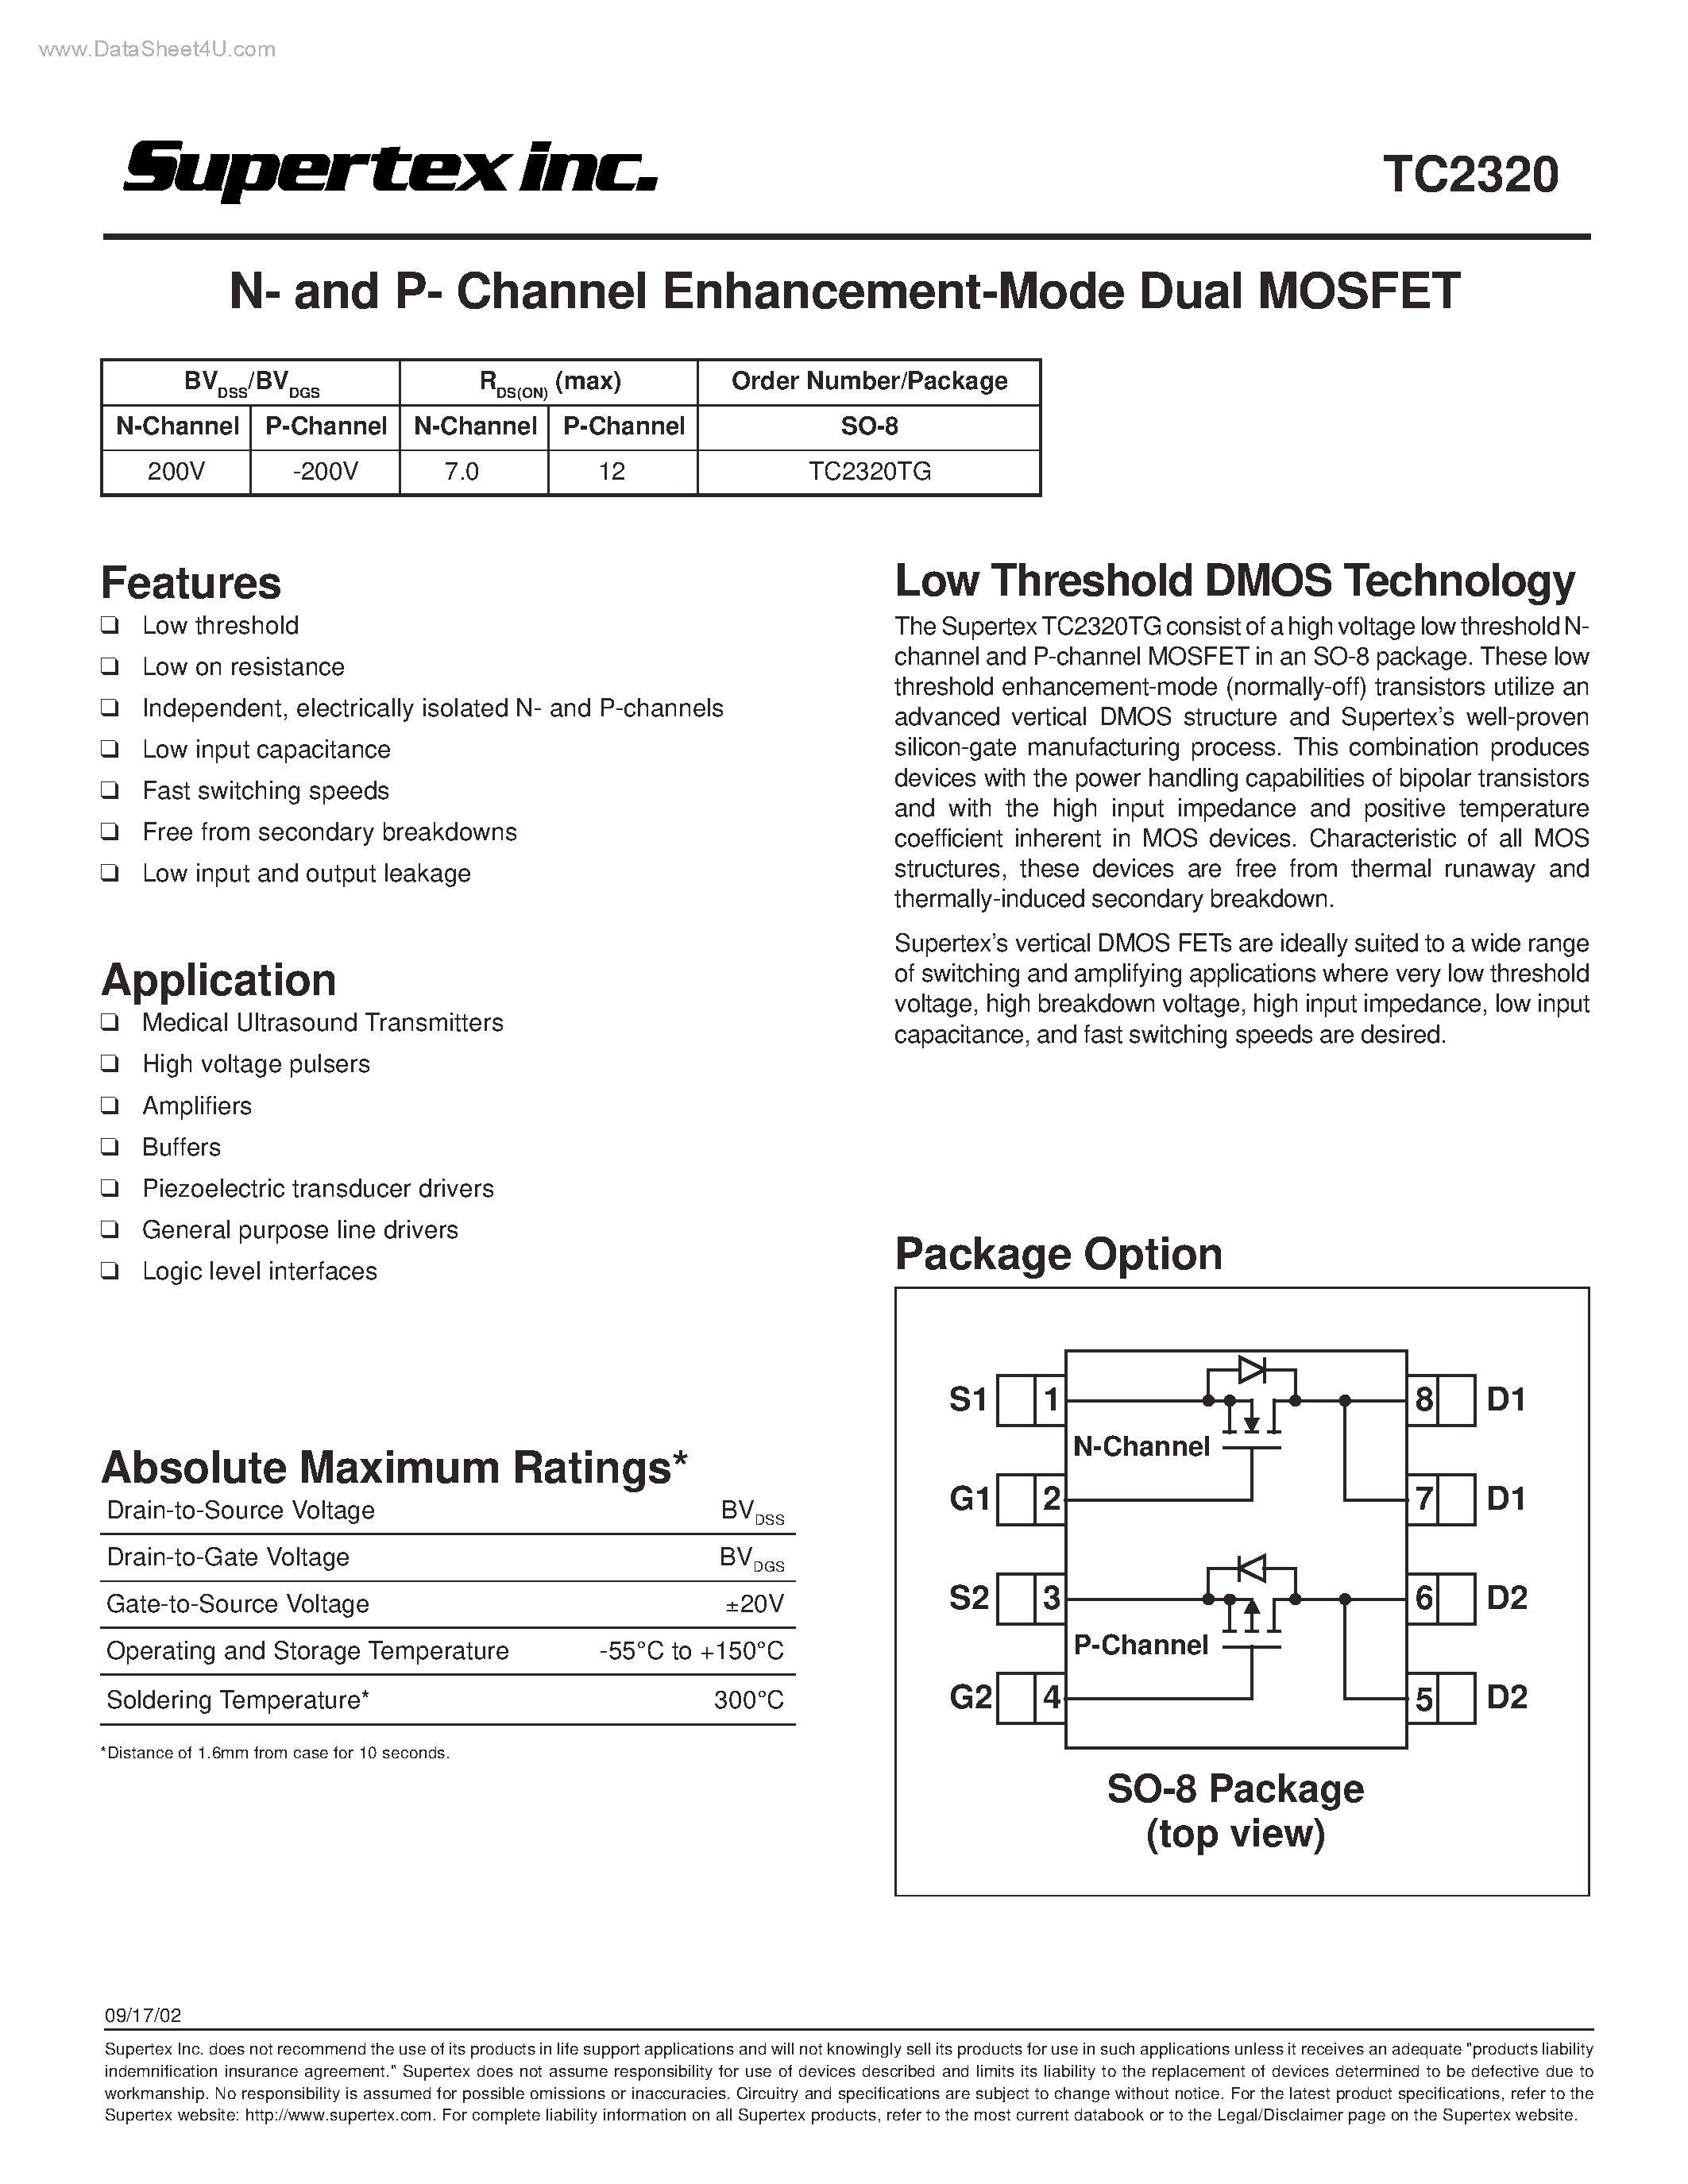 Datasheet TC2320 - N- and P- Channel Enhancement-Mode Dual MOSFET page 1